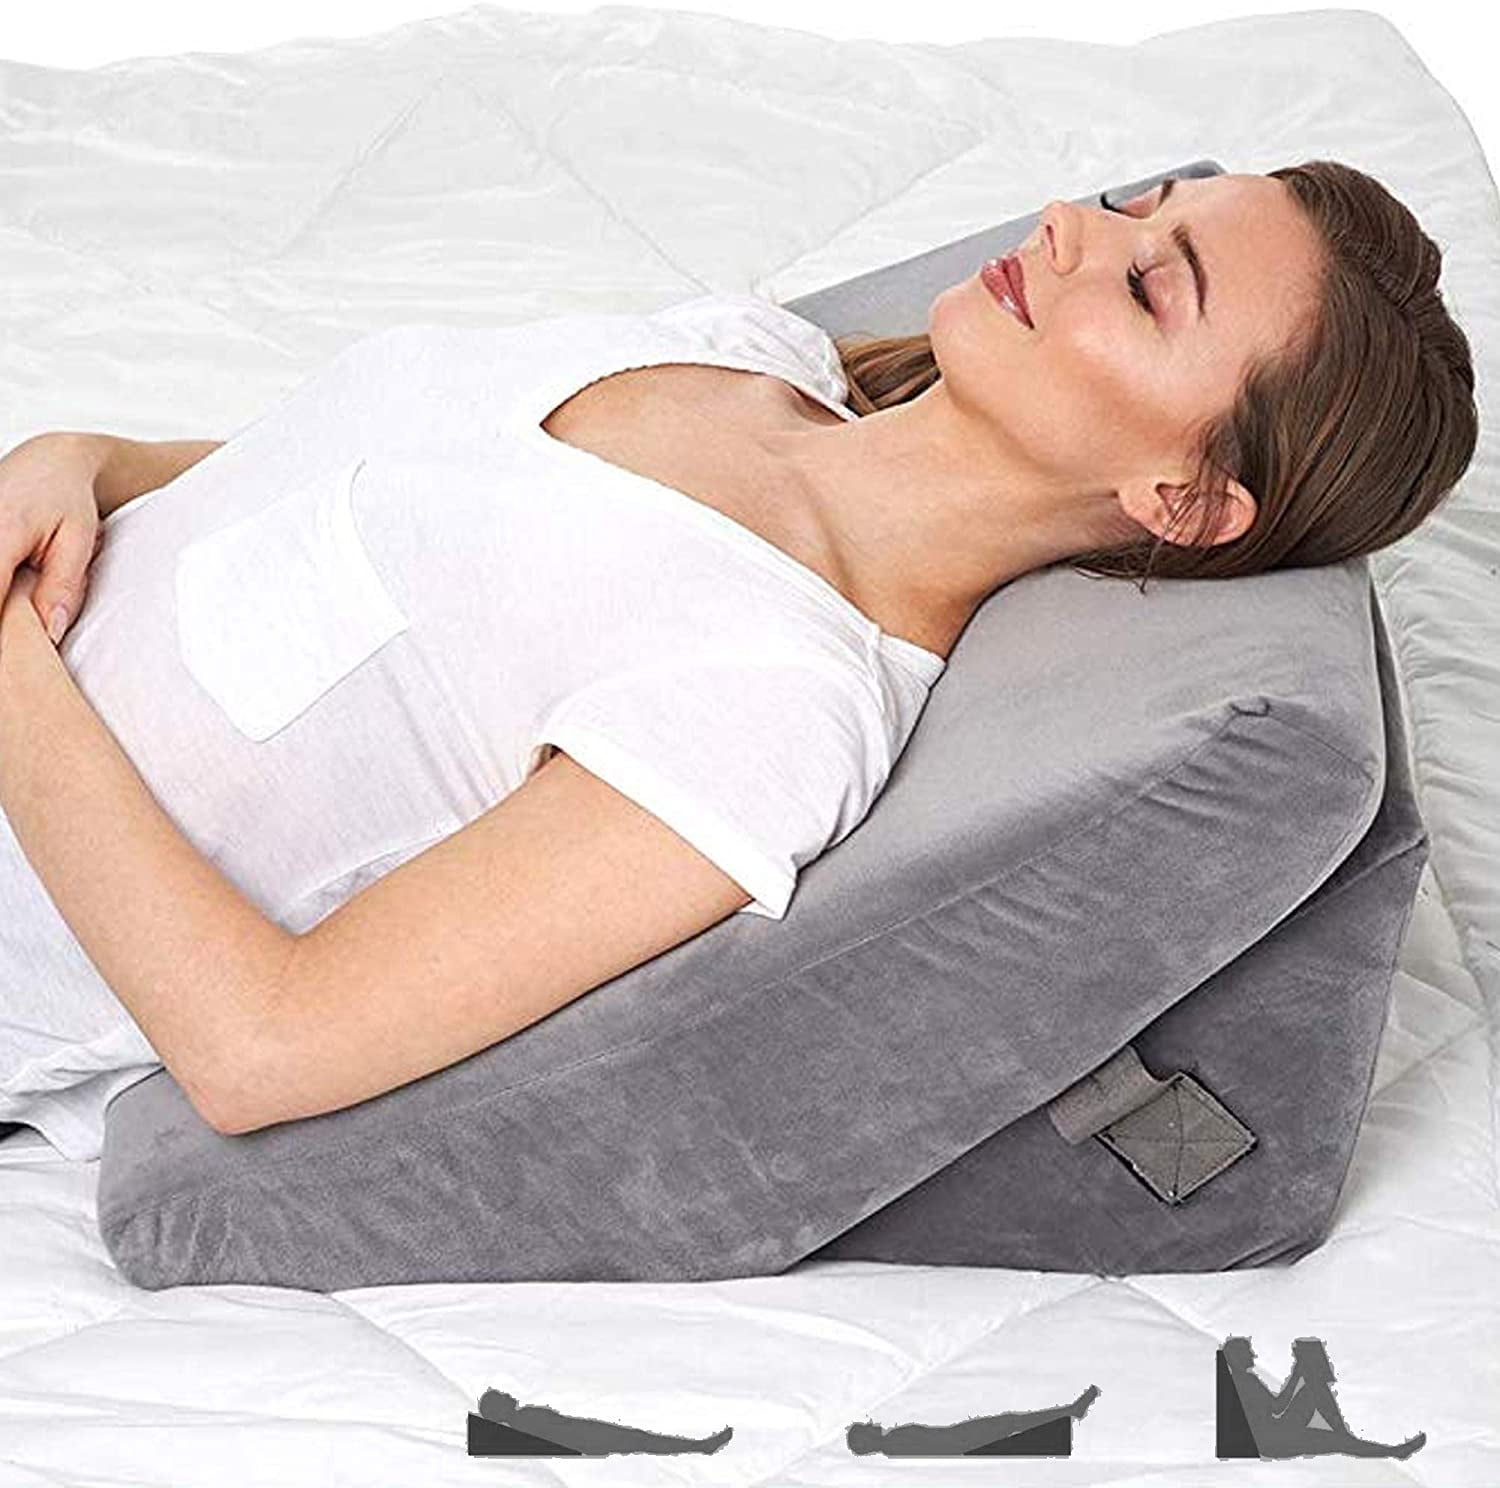 Bed Wedge Pillow – 3 in 1 Adjustable to 4.5, 7.5 & 12 Inches Foam